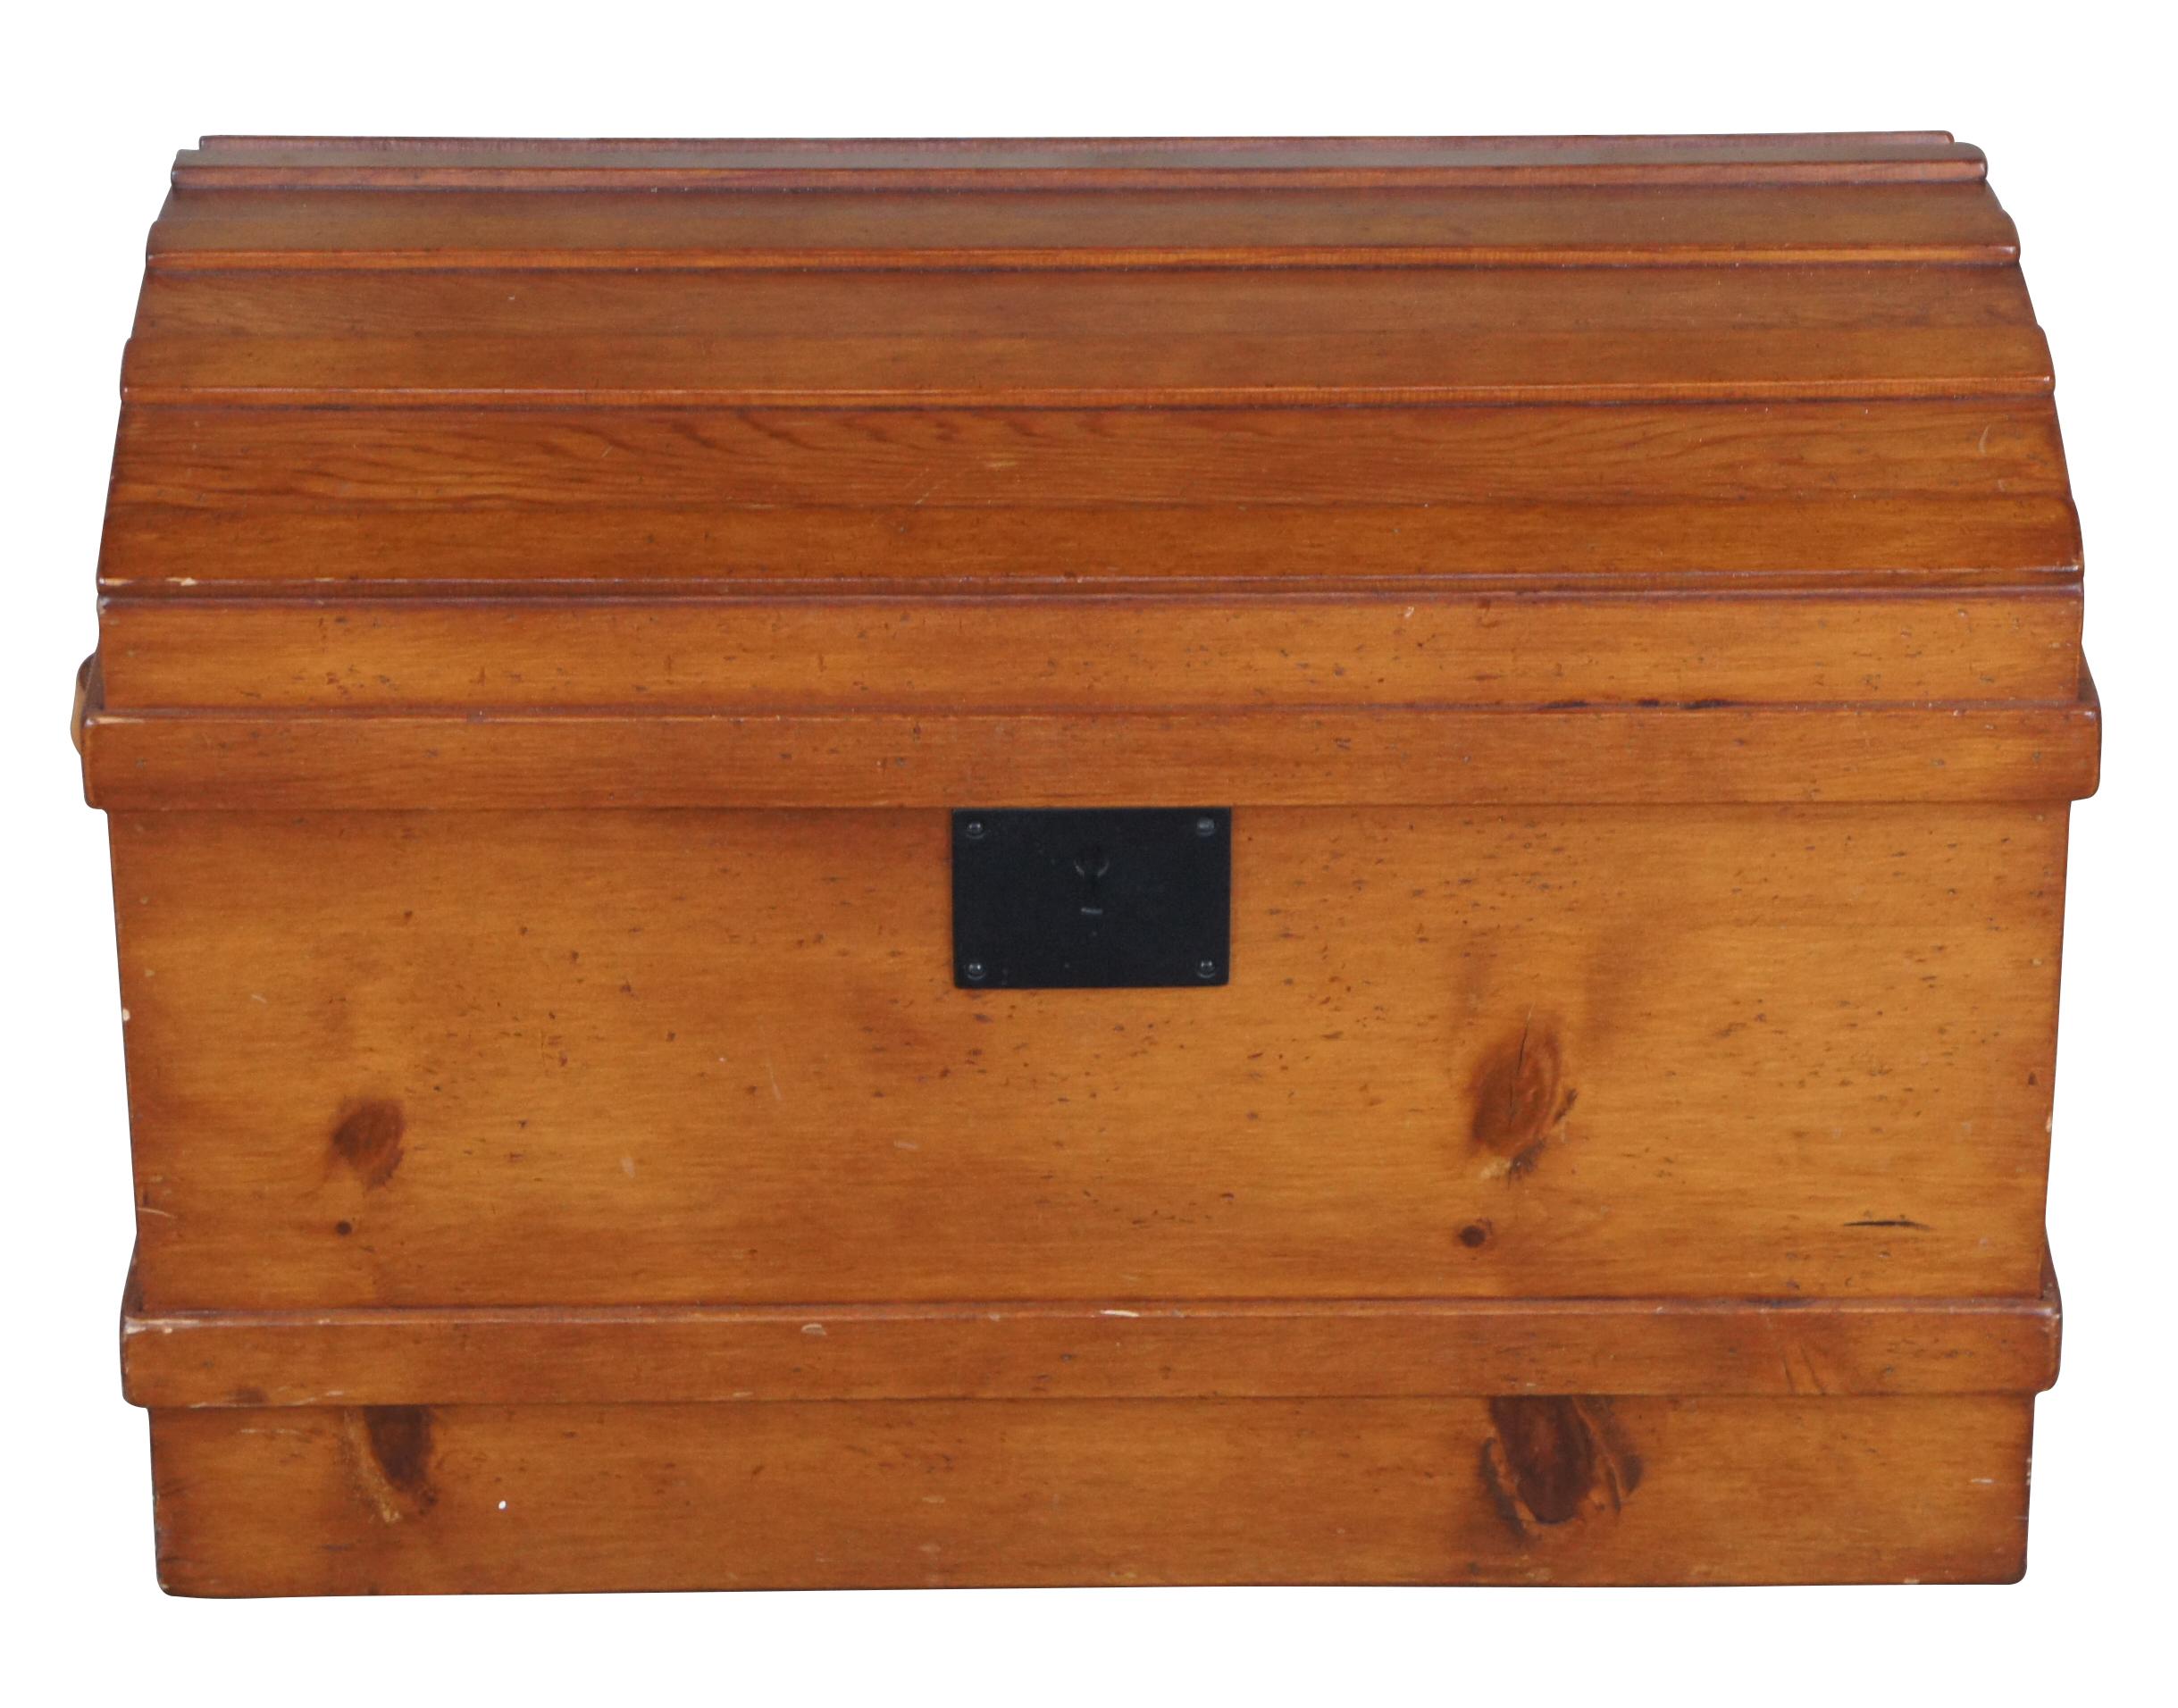 A Victorian style dome top trunk from the latter half of the 20th century. Made from pine with leather handles and an iron escutcheon plate. Opens to a striped linen interior with removable tray.